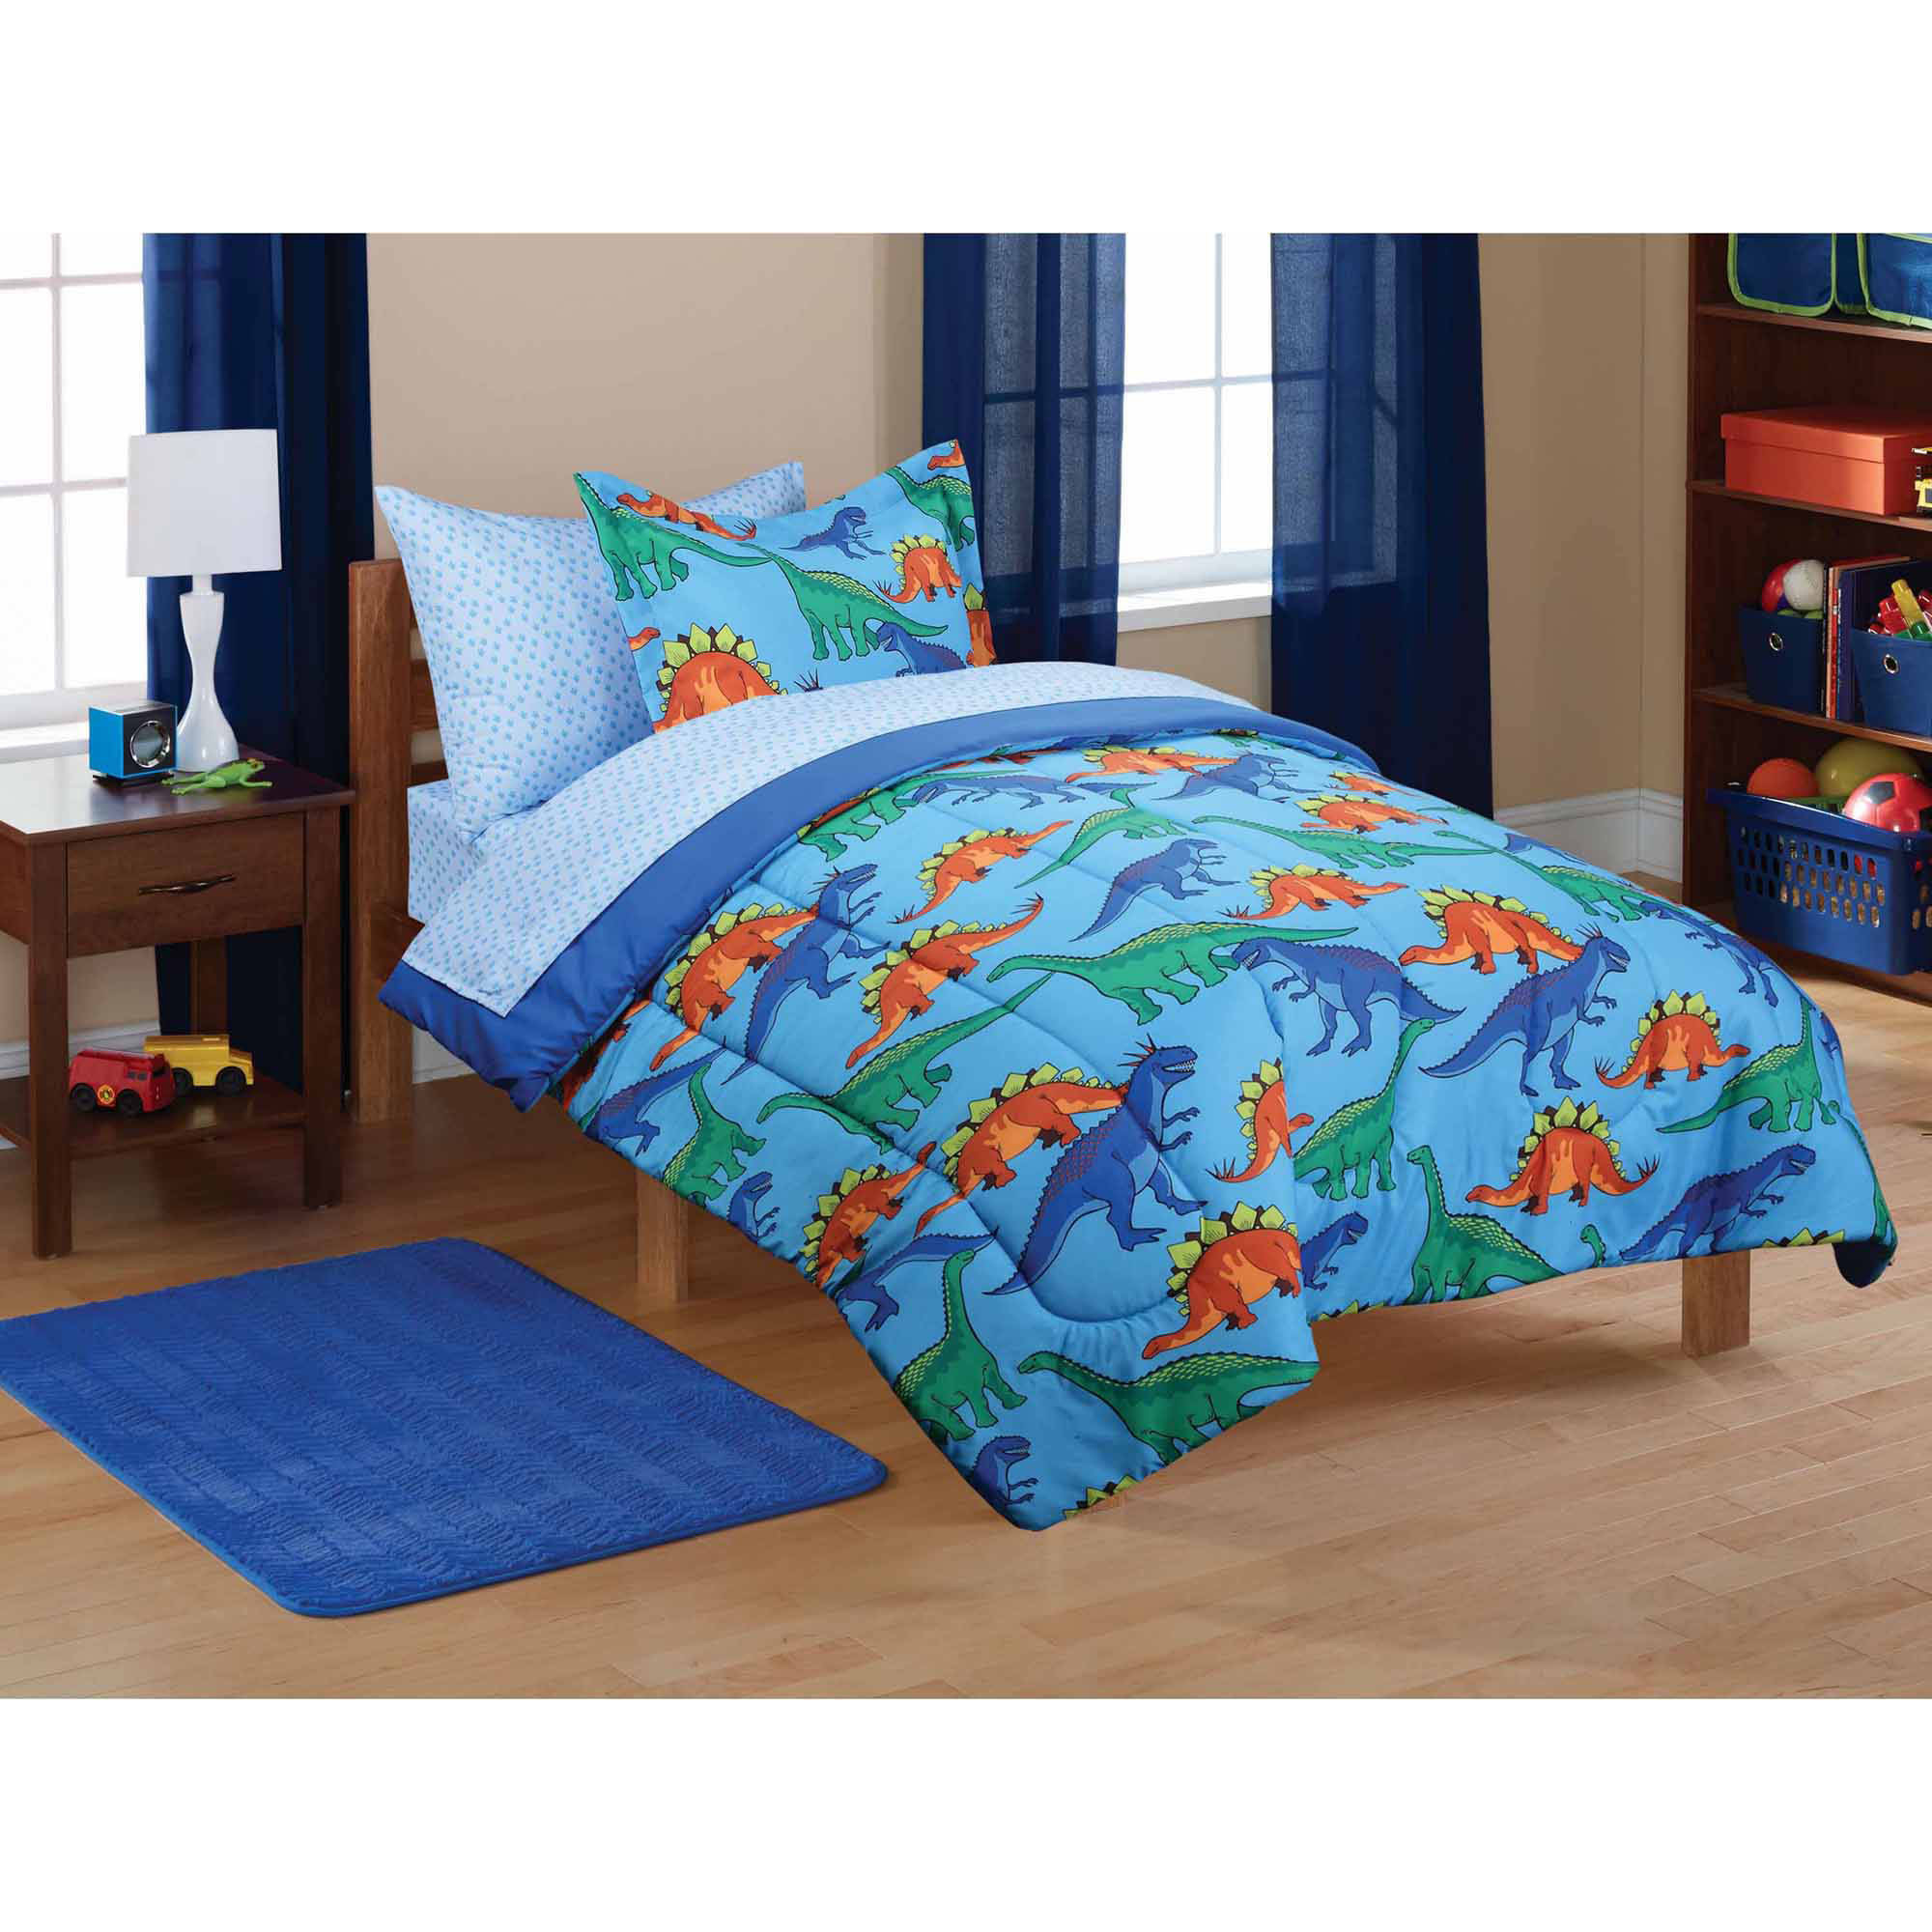 Walmart Bedroom Sets For Kids
 Mainstays Kids Country Meadows Bed in a Bag Bedding Set